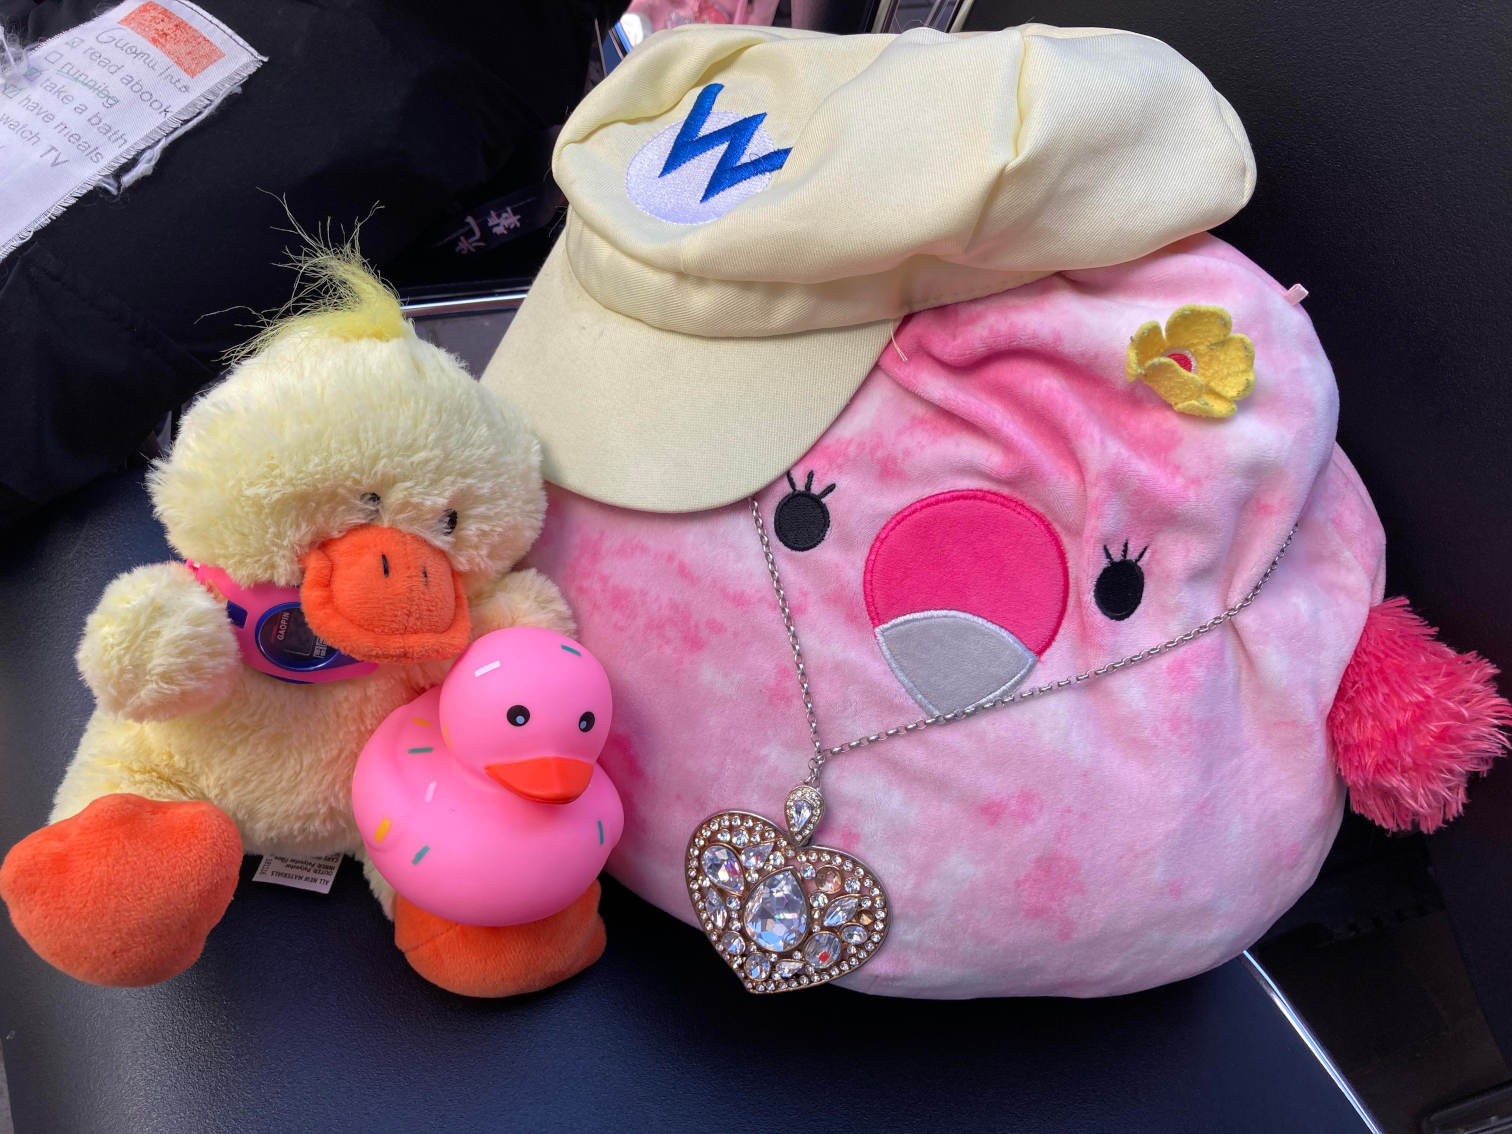 Pink Squishmallow, wario hat on, love heart necklace. Pink donut ducky. Ducky plush.